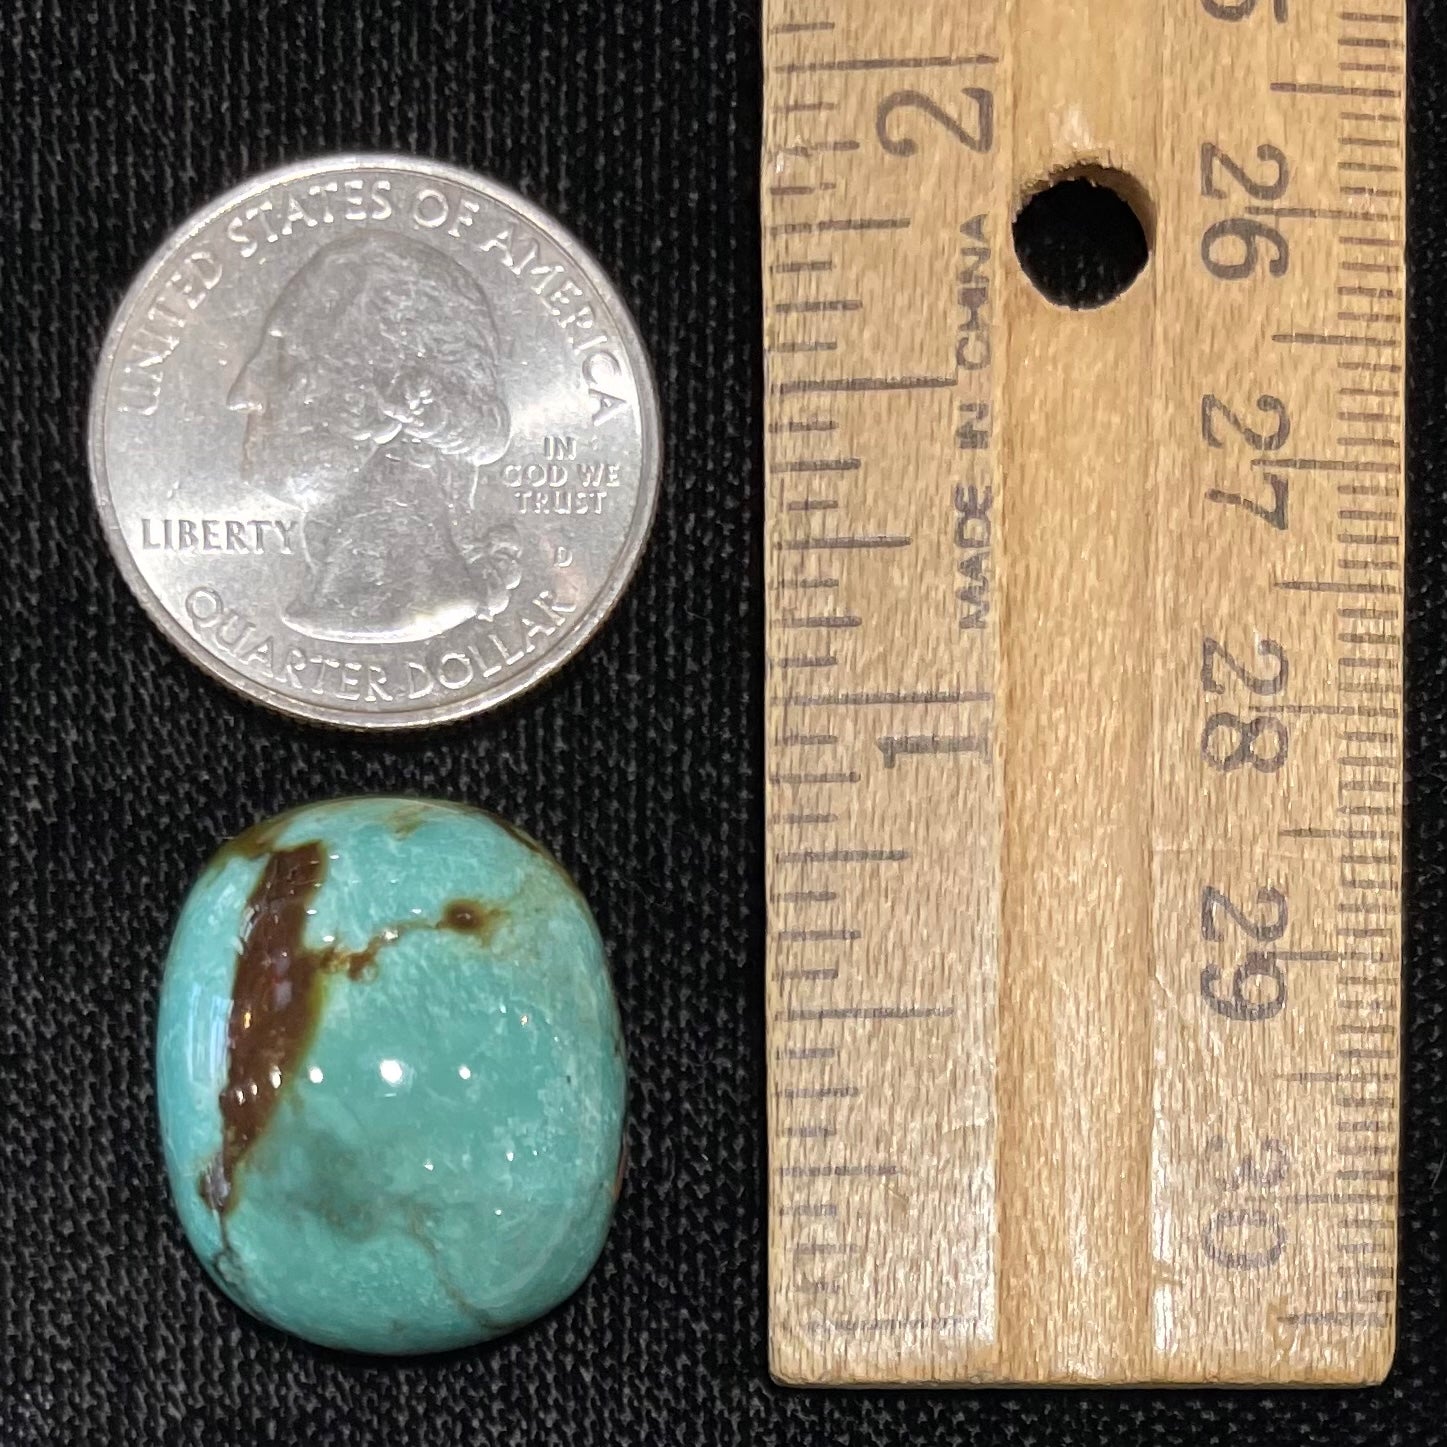 A loose, cushion shaped cabochon cut turquoise stone from Royston District, Nevada.